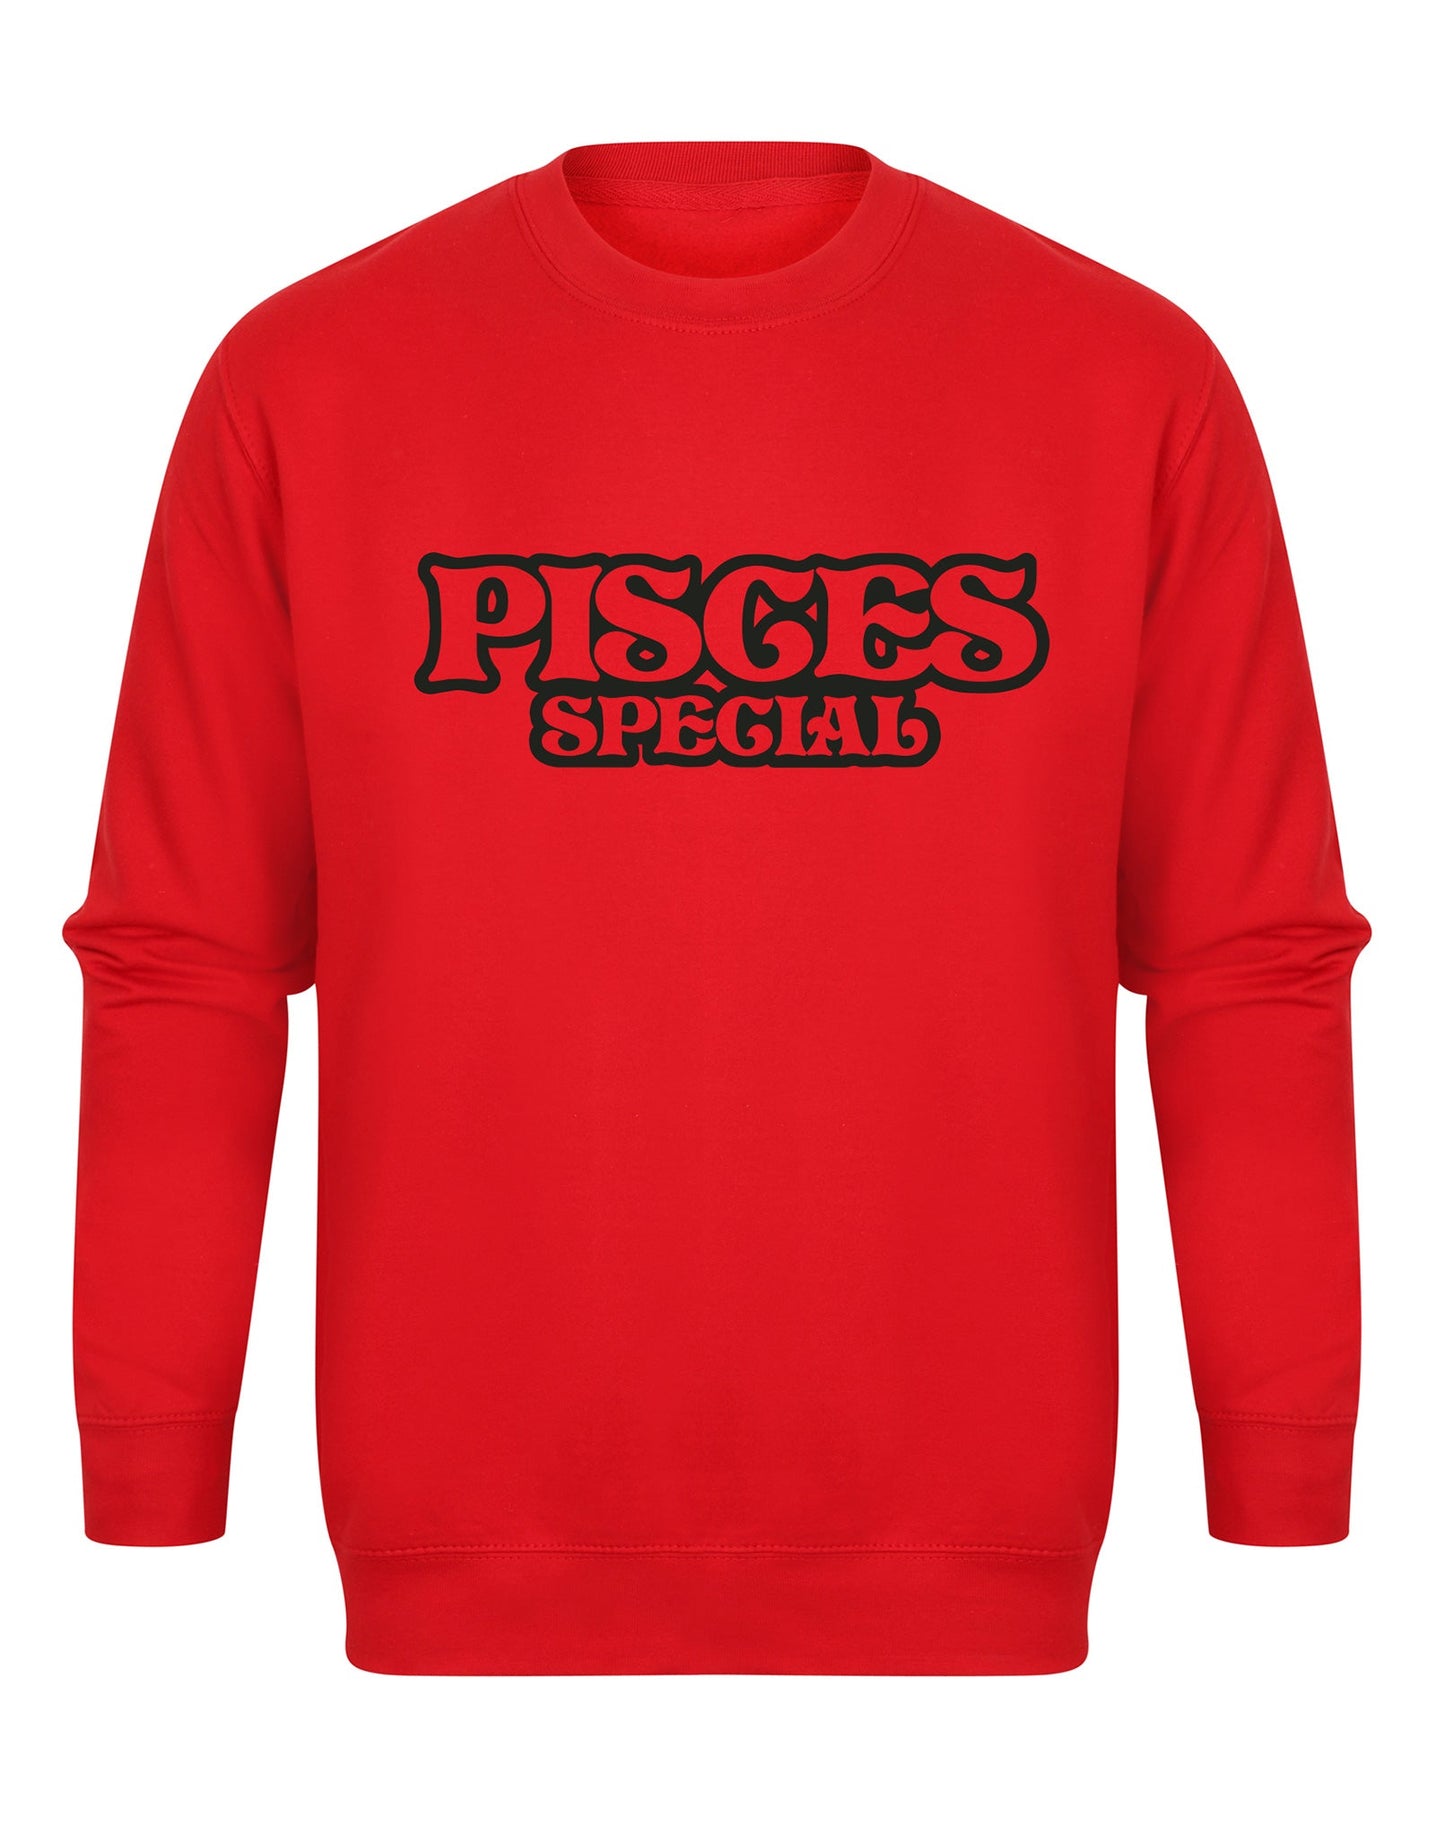 Pisces Special unisex fit sweatshirt - various colours - Dirty Stop Outs